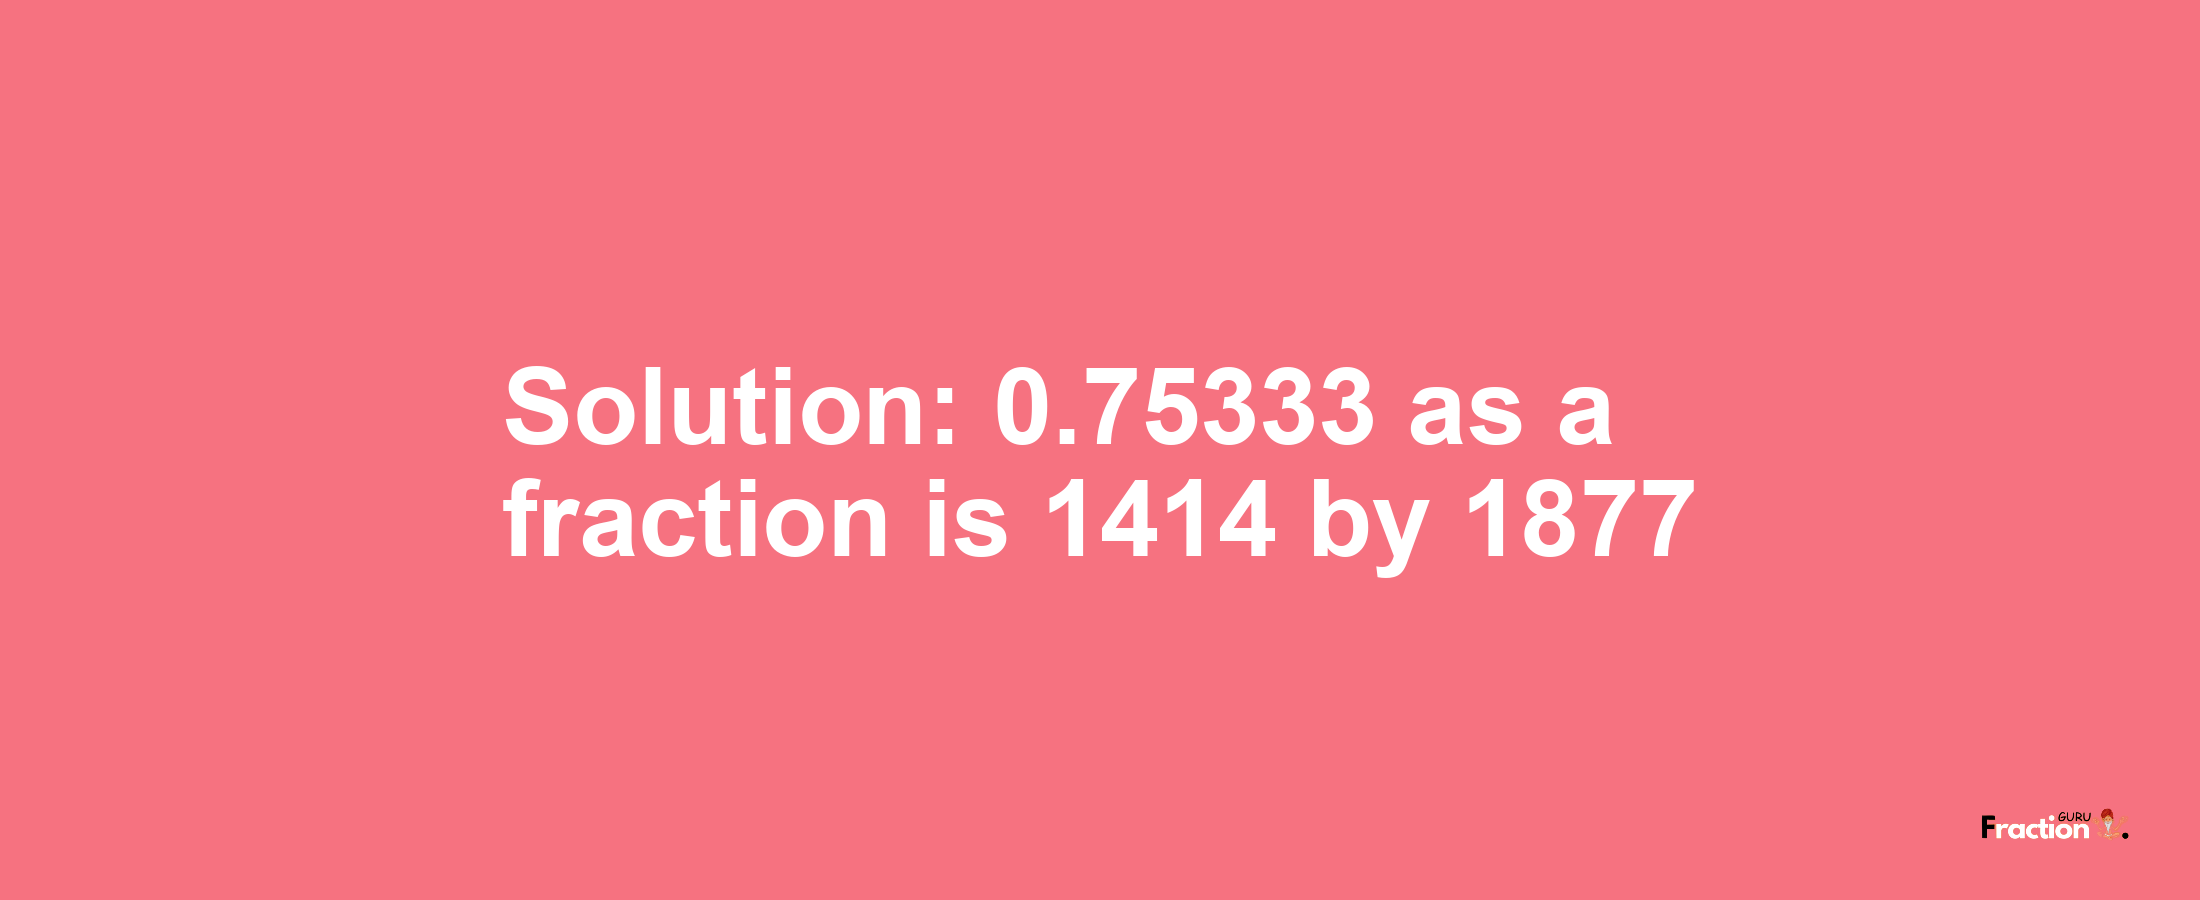 Solution:0.75333 as a fraction is 1414/1877